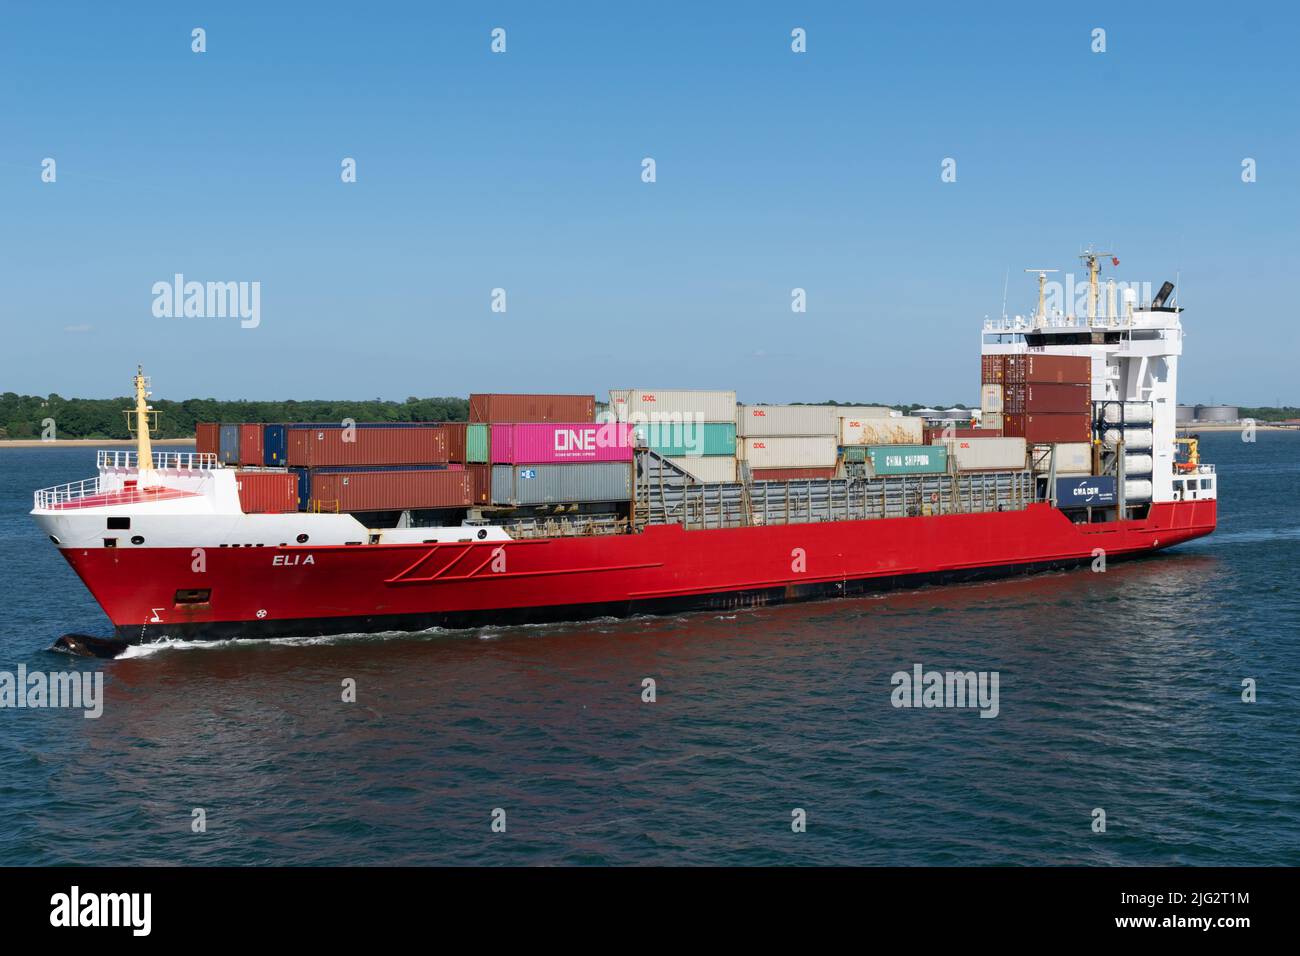 ELI A container ship sailing in the Solent with pink container of Ocean Network Express and text ONE Stock Photo